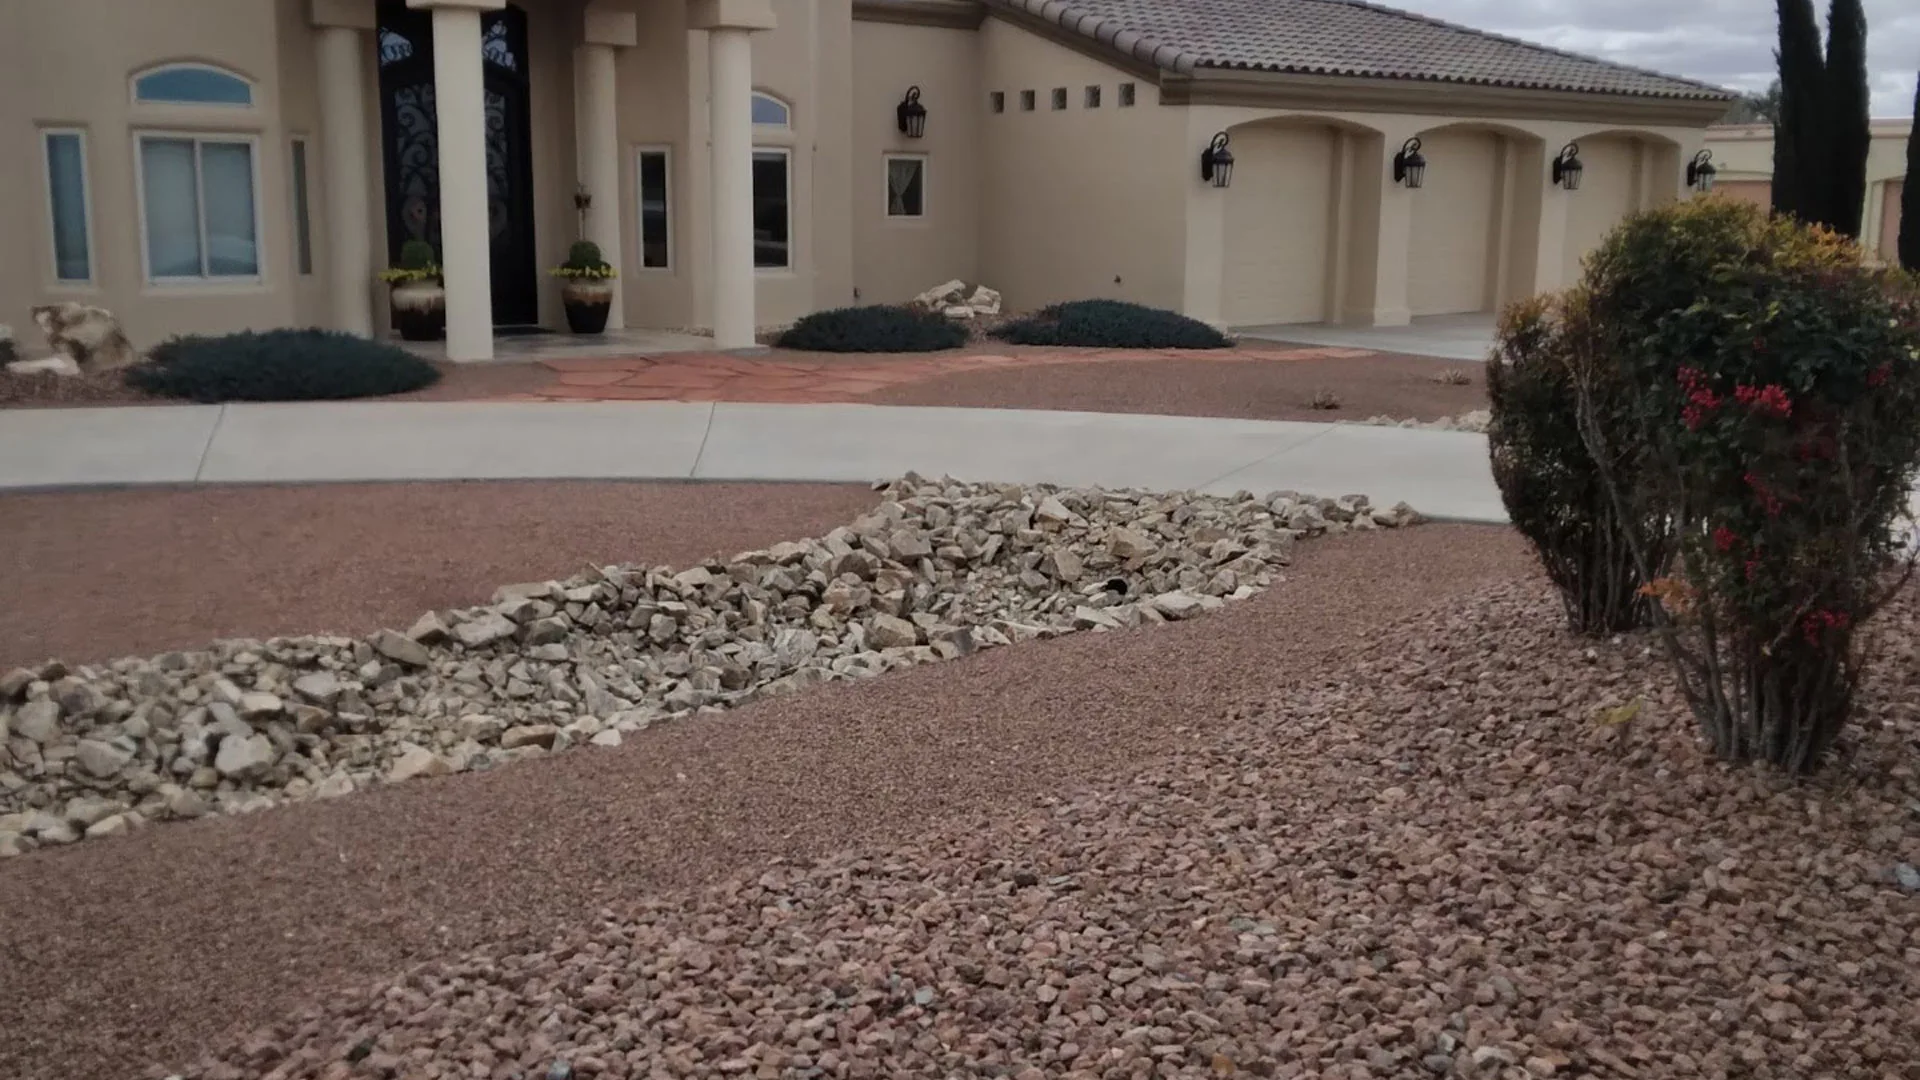 Rock filled landscaping for a property in Las Cruces, TX.